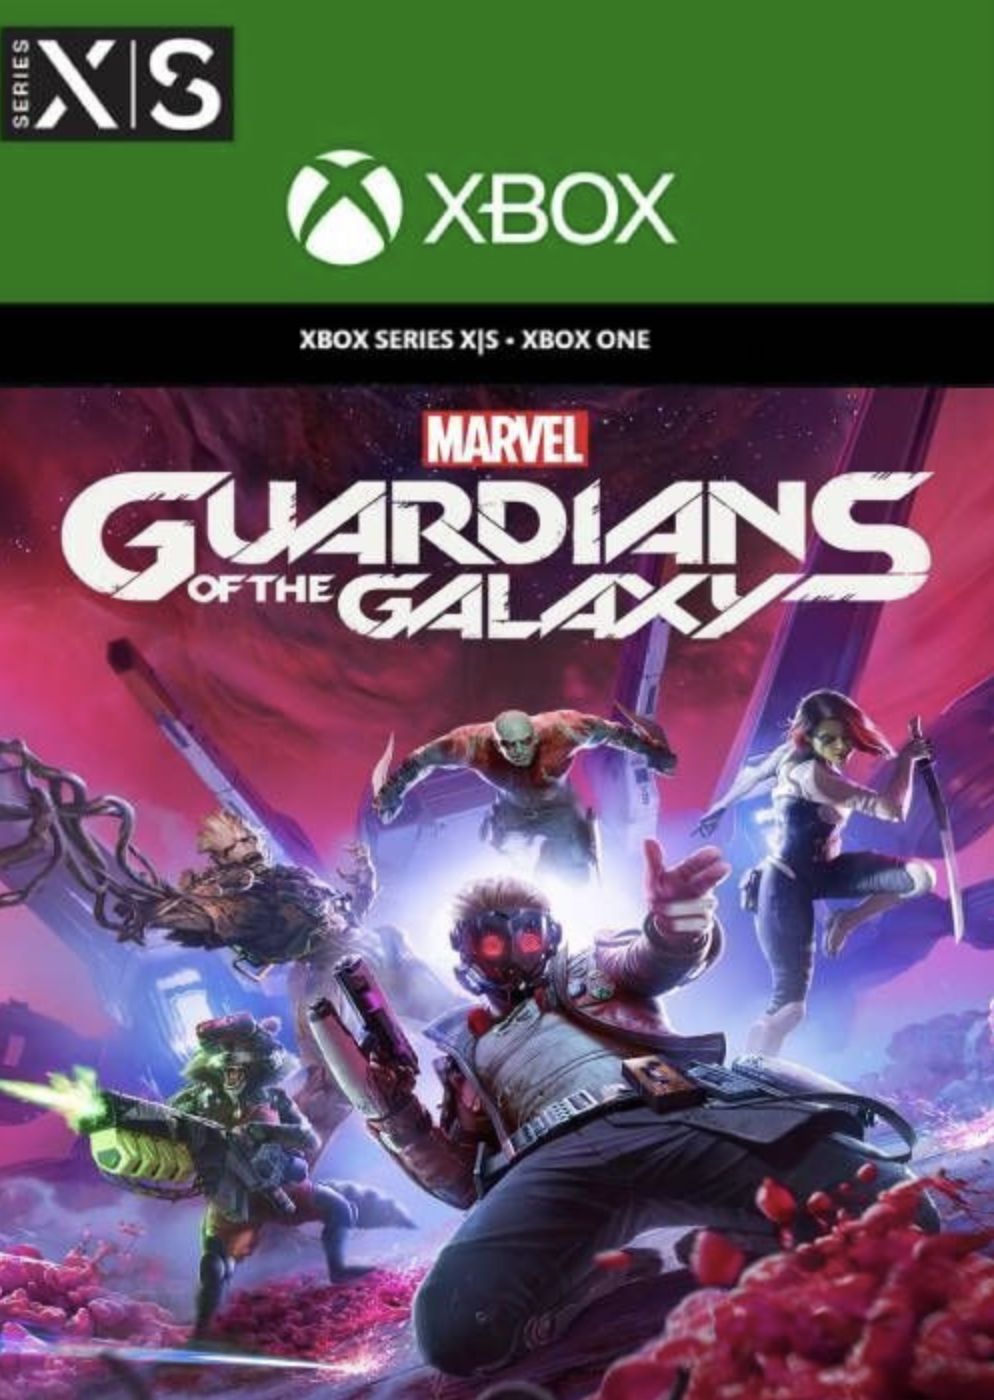 Marvels guardians of the galaxy steam фото 97